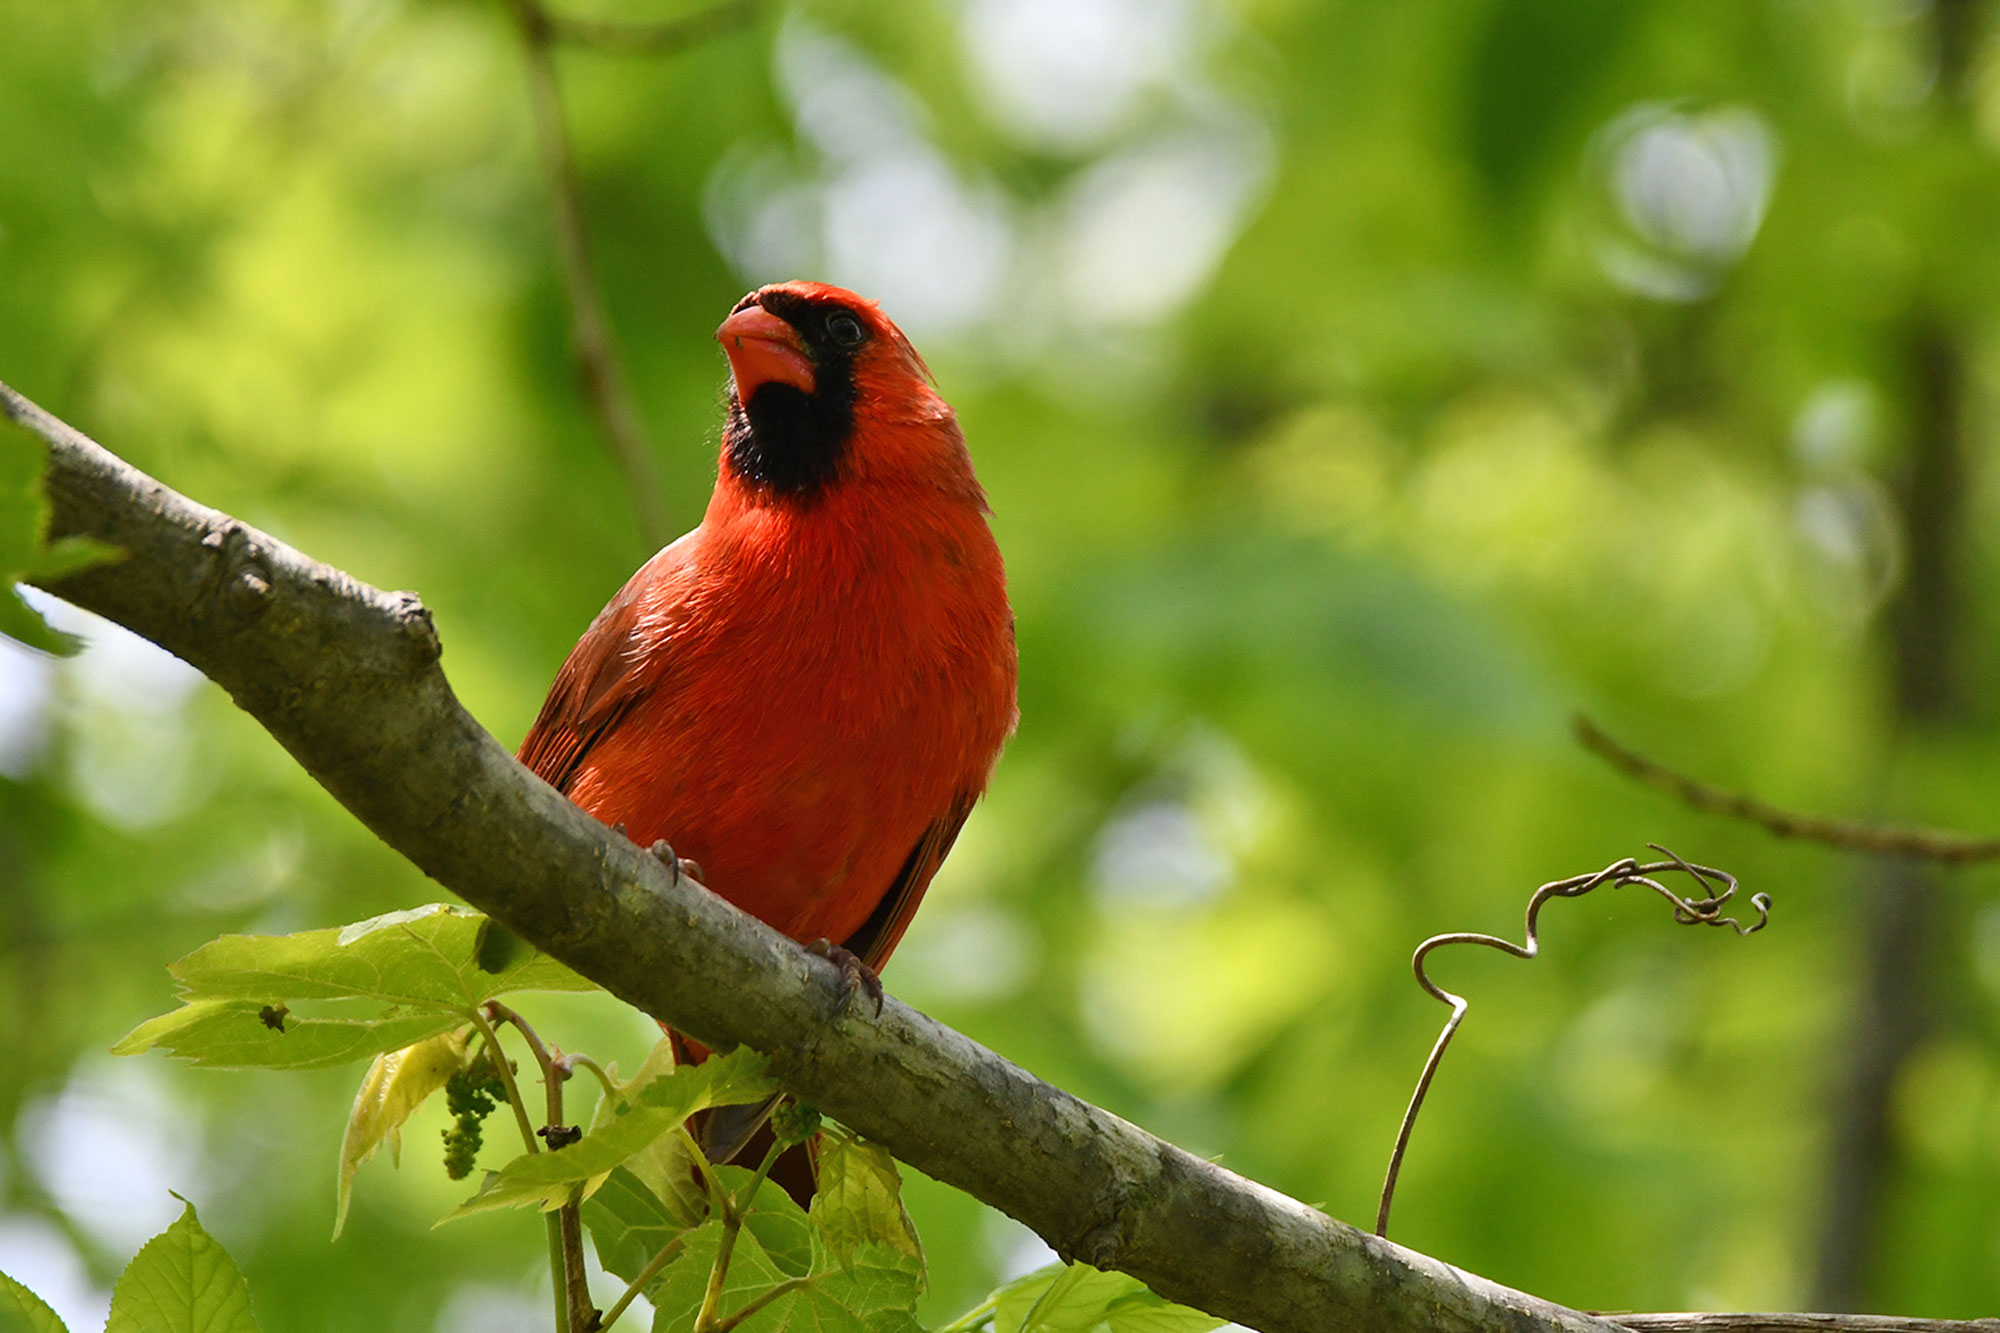 A northern cardinal in a tree